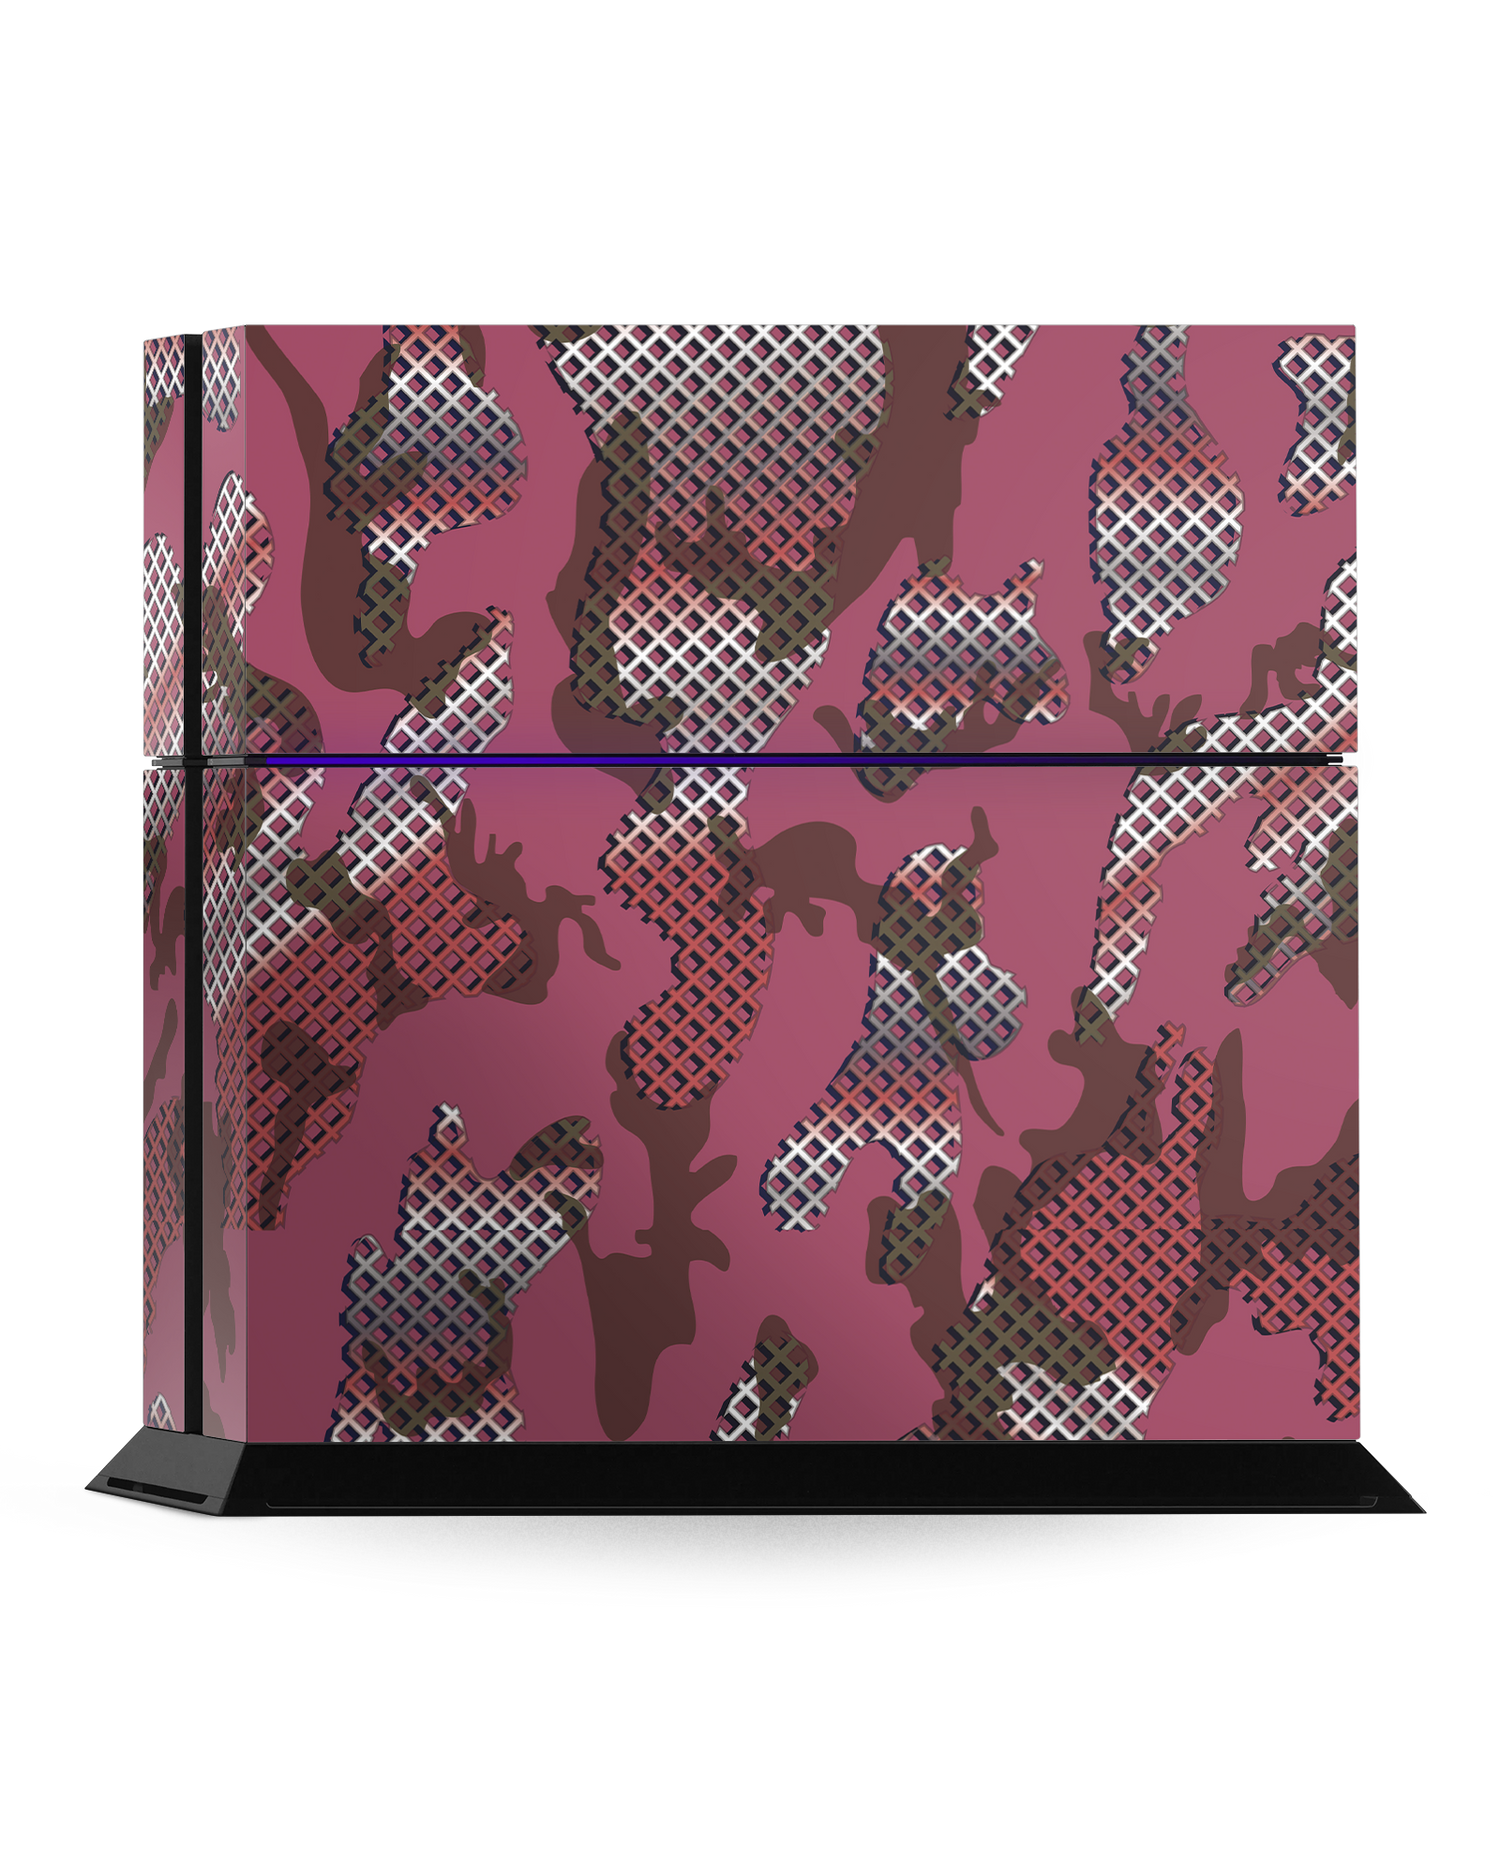 Fall Camo V Console Skin for Sony PlayStation 4: Standing